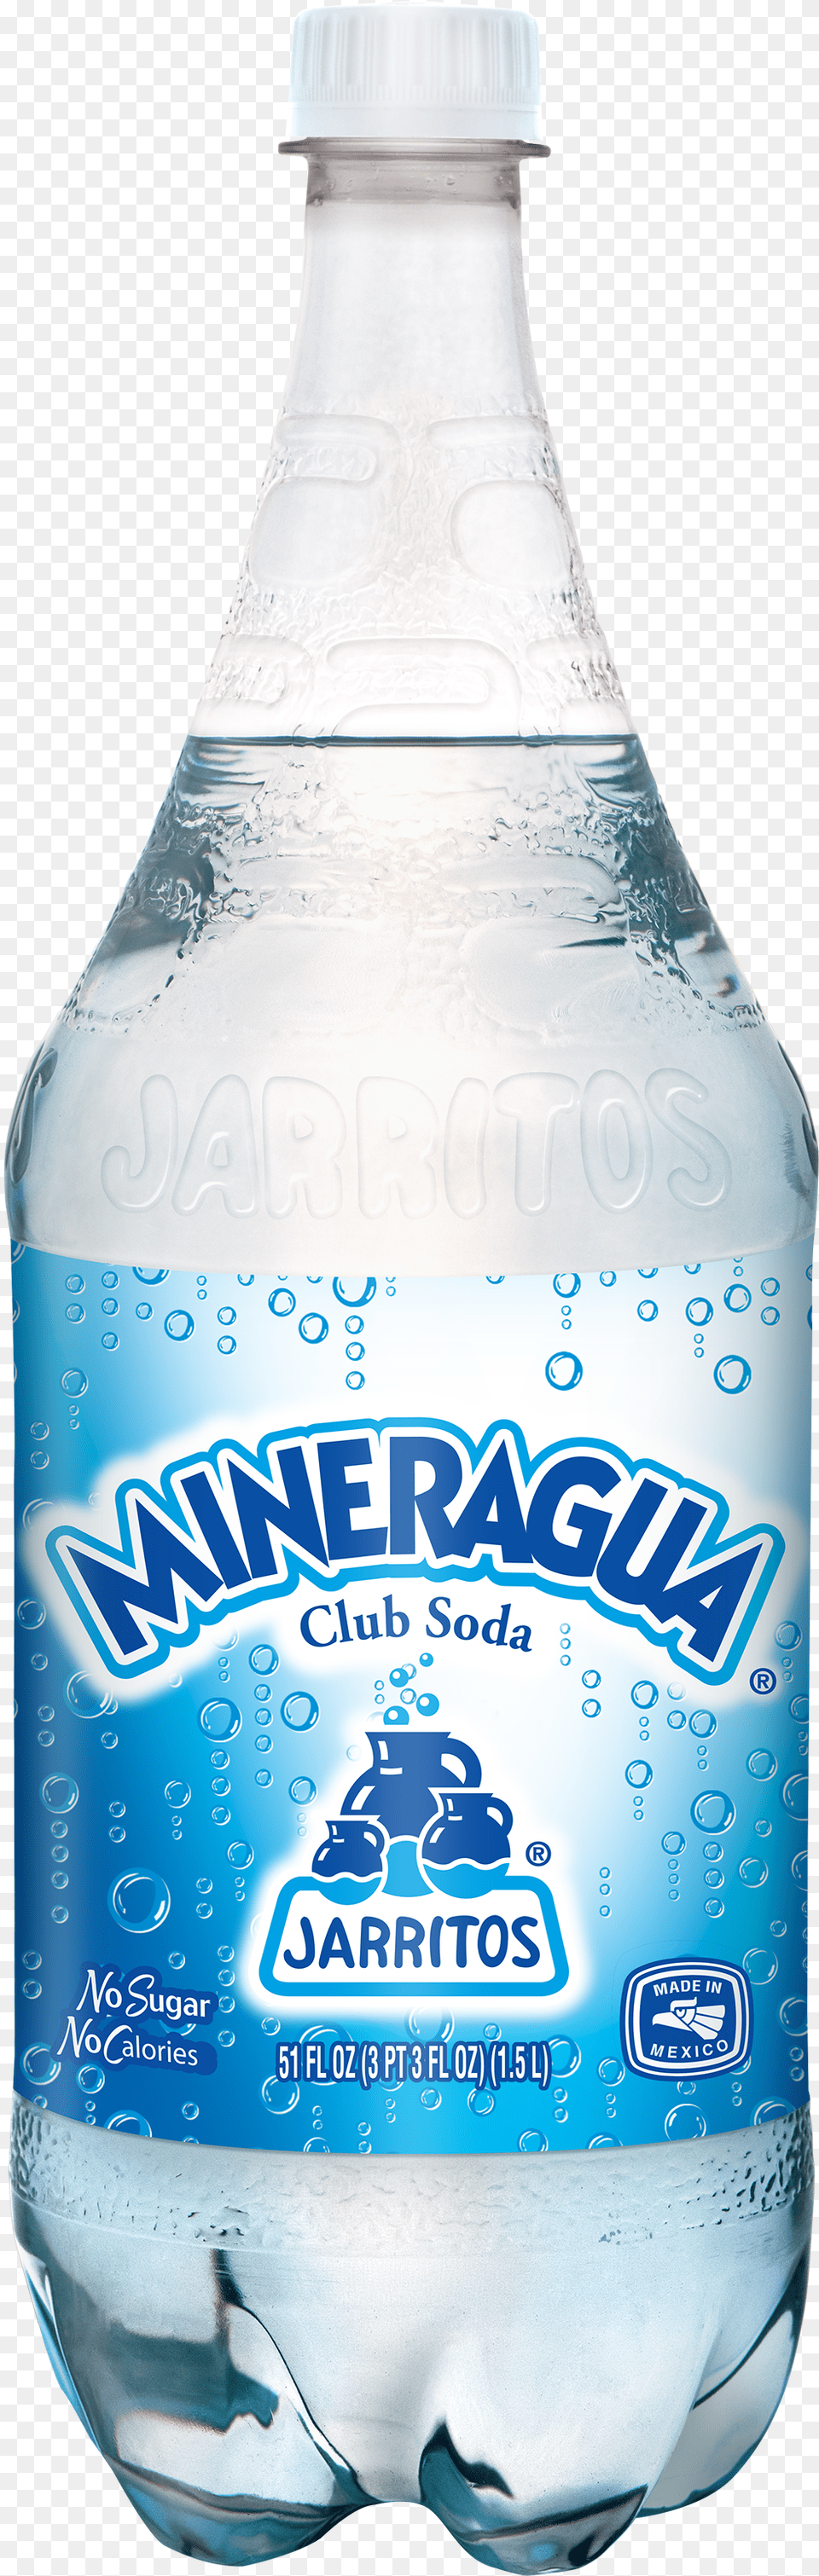 Jarritos Mineragua Club Soda Glass Bottle, Beverage, Mineral Water, Water Bottle, Alcohol Png Image